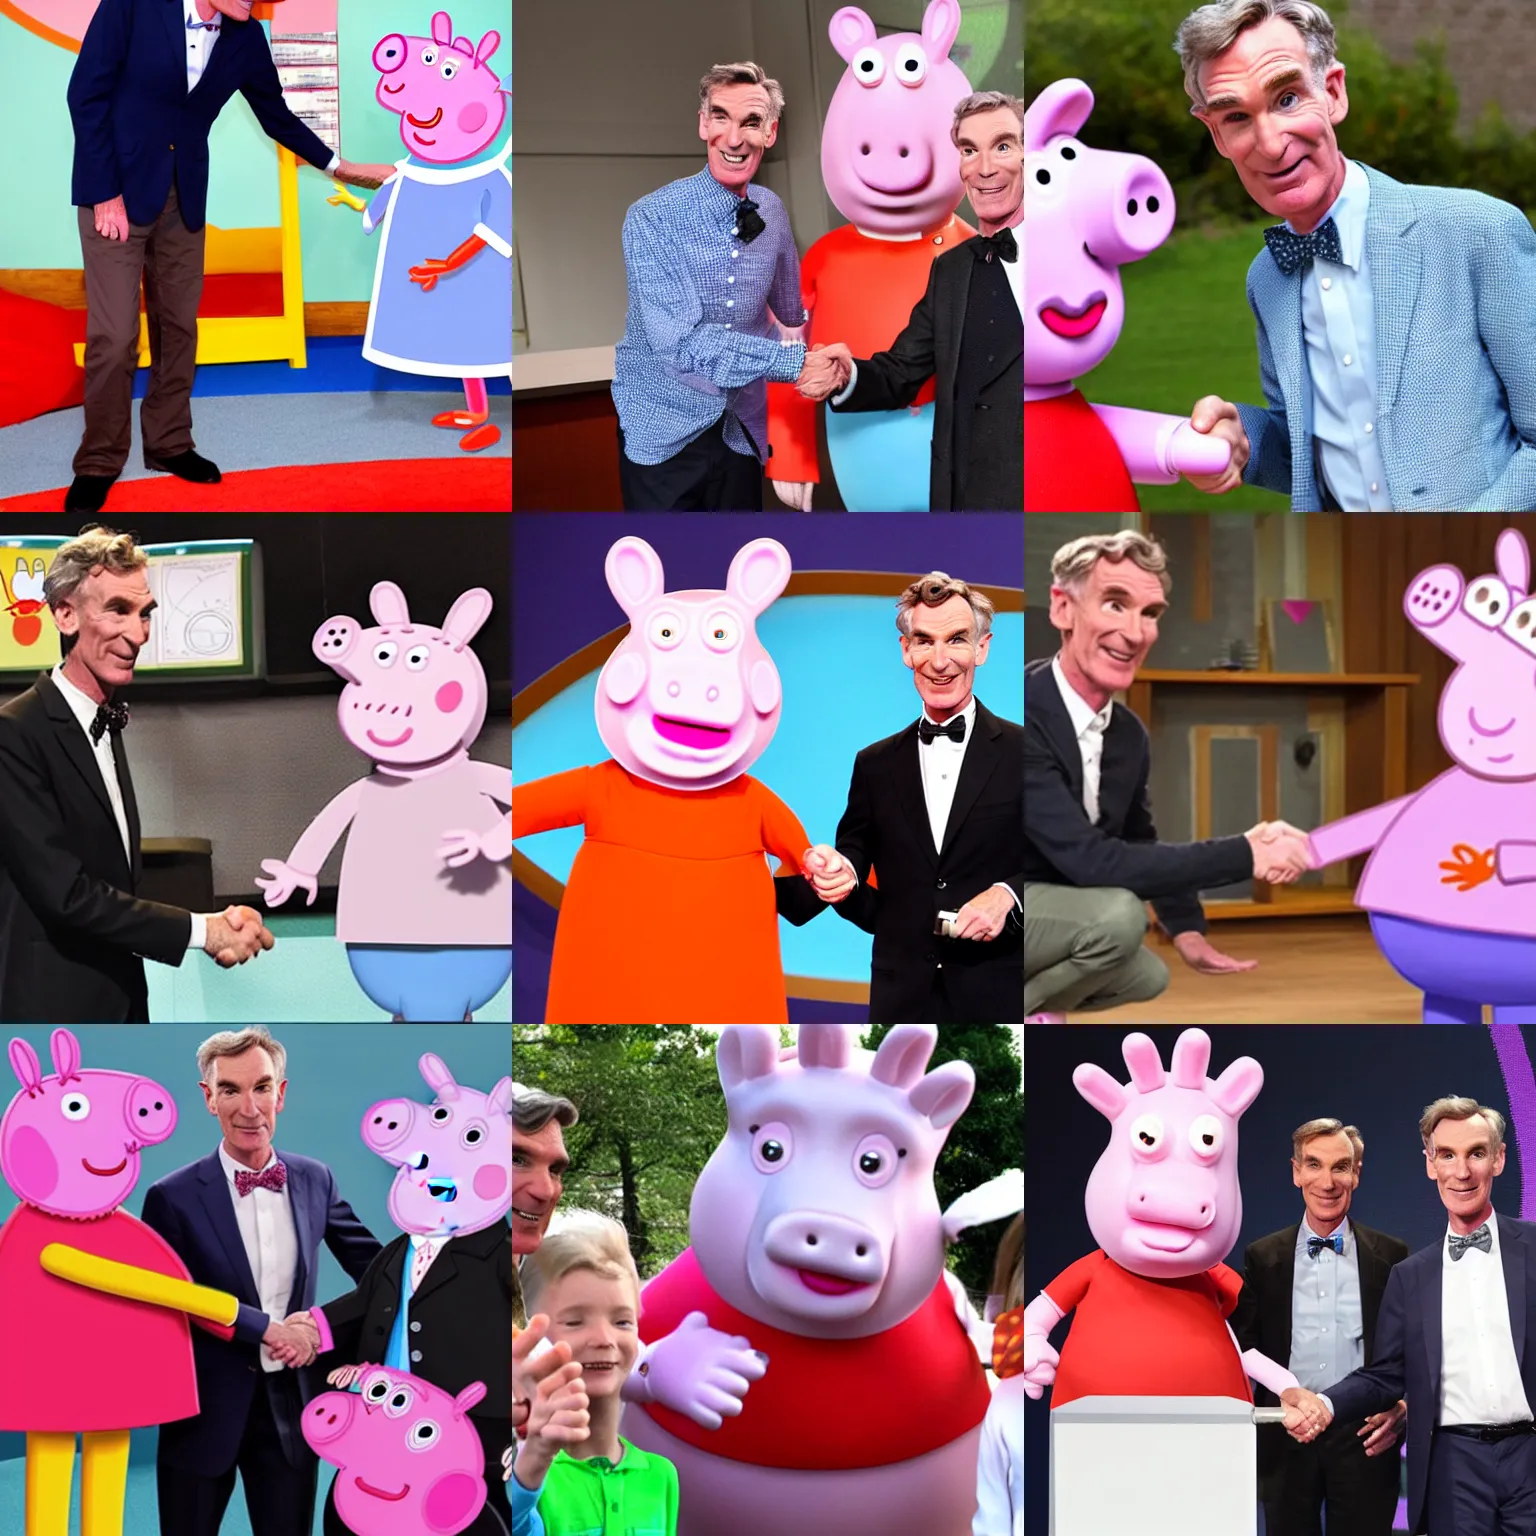 Prompt: bill nye the science guy shaking hands with peppa pig